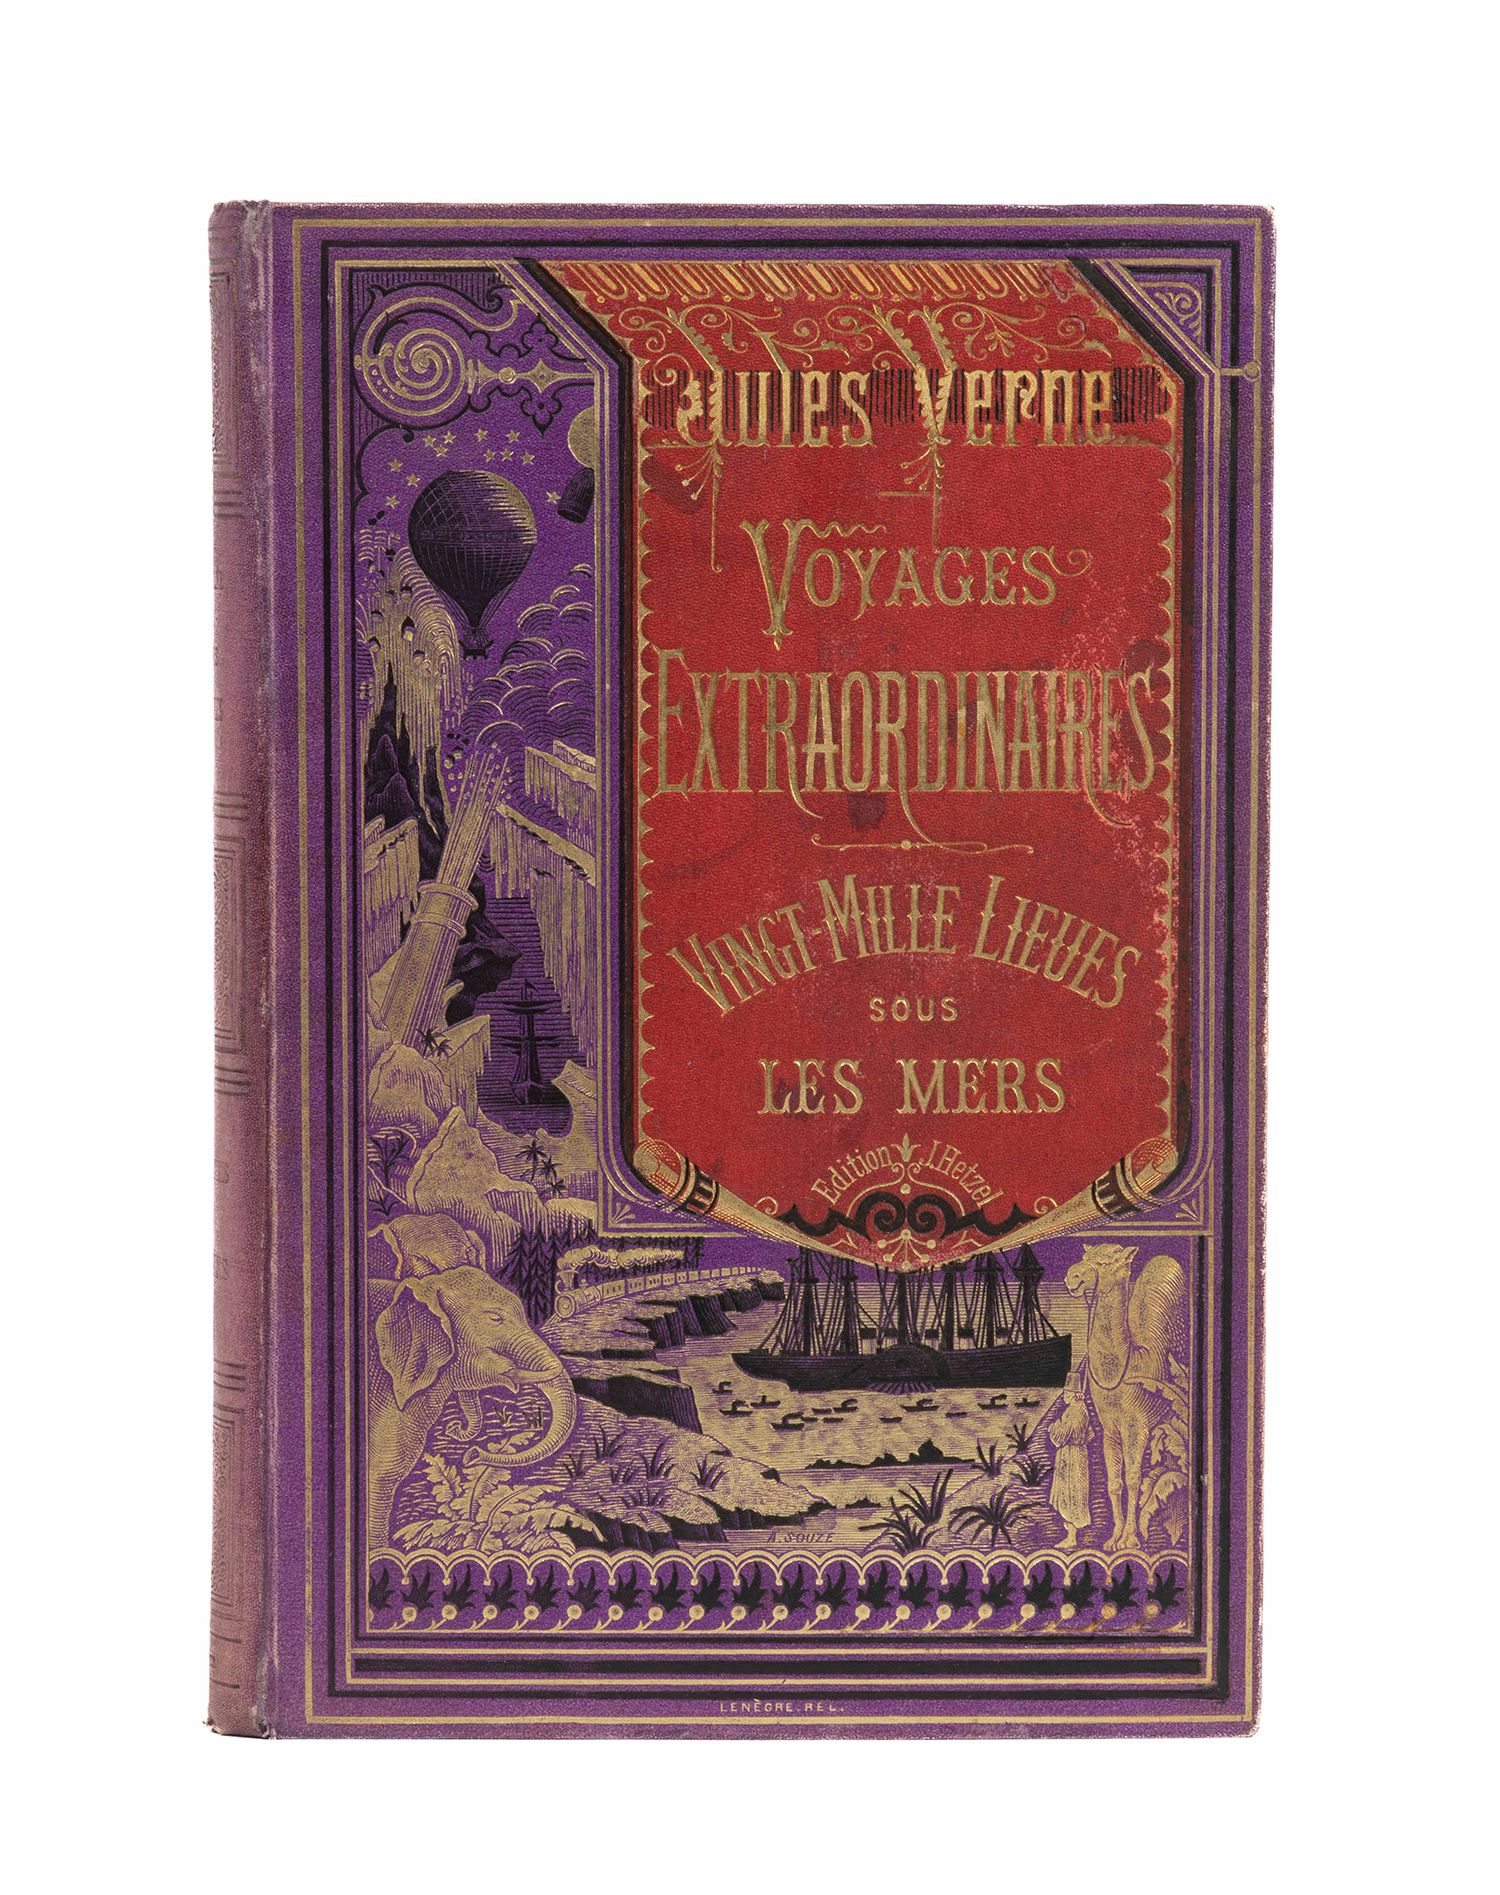 Null Twenty thousand leagues under the sea by Jules Verne. Illustrations by de N&hellip;